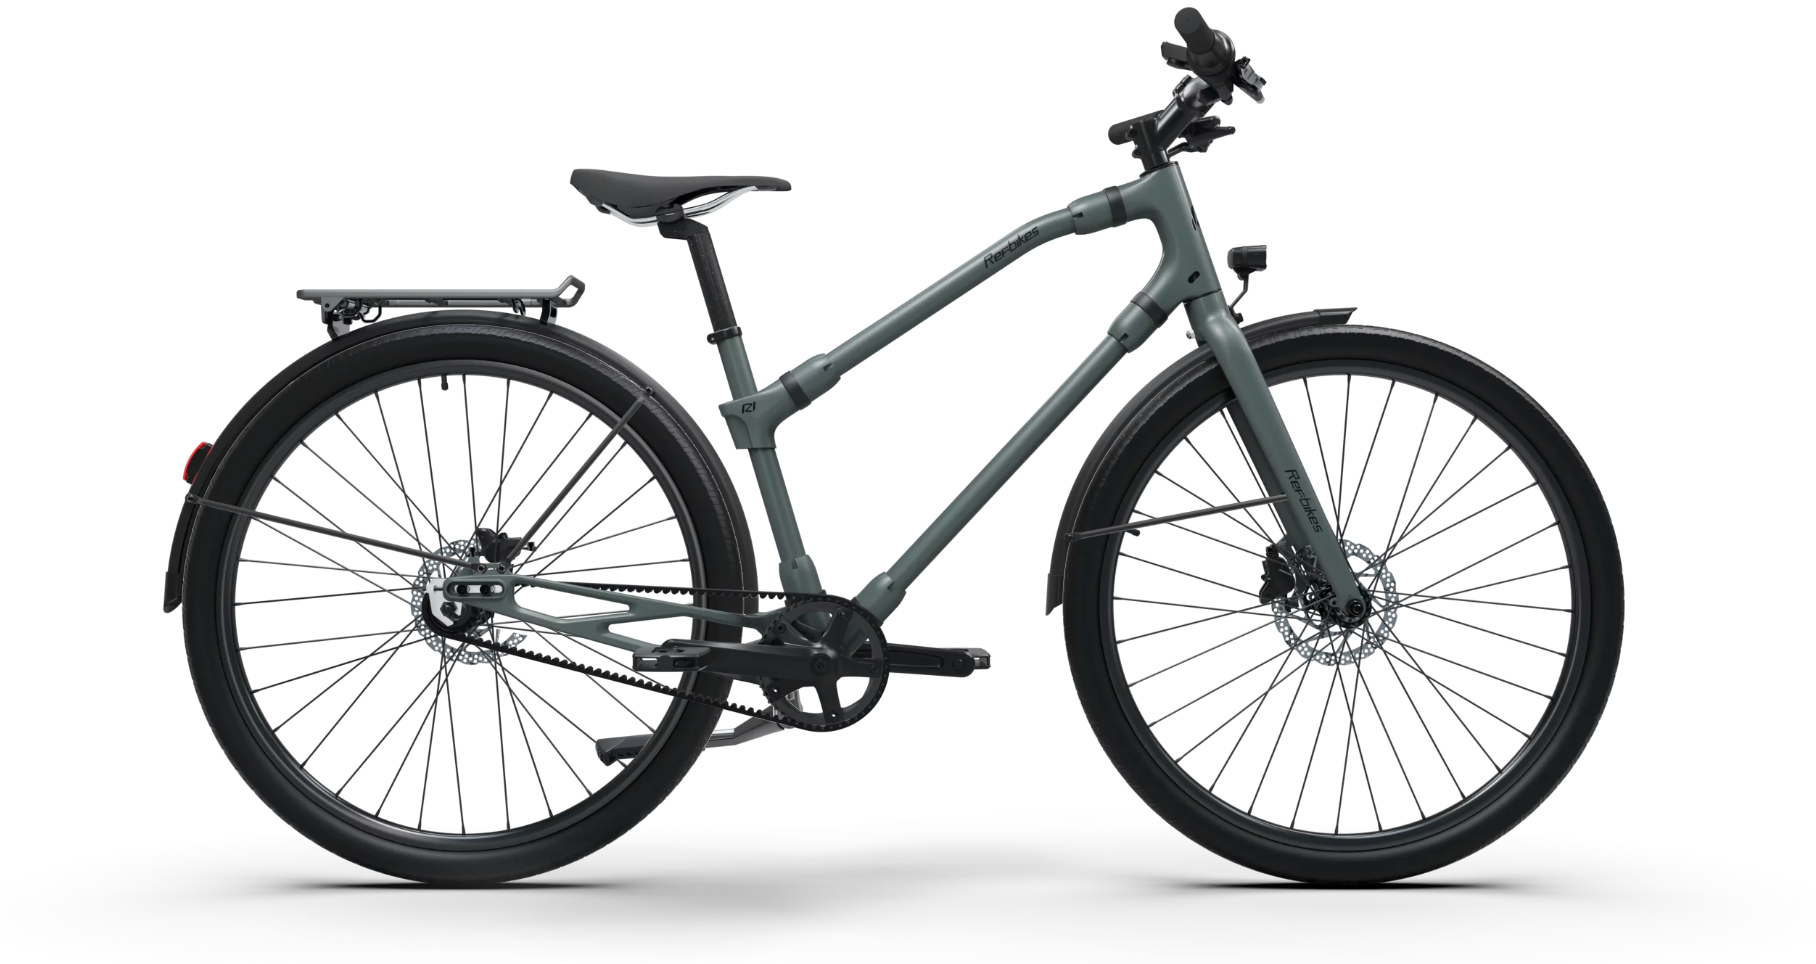 Ref Urban bike in muted sage green, featuring eco-friendly design and pedal assist.